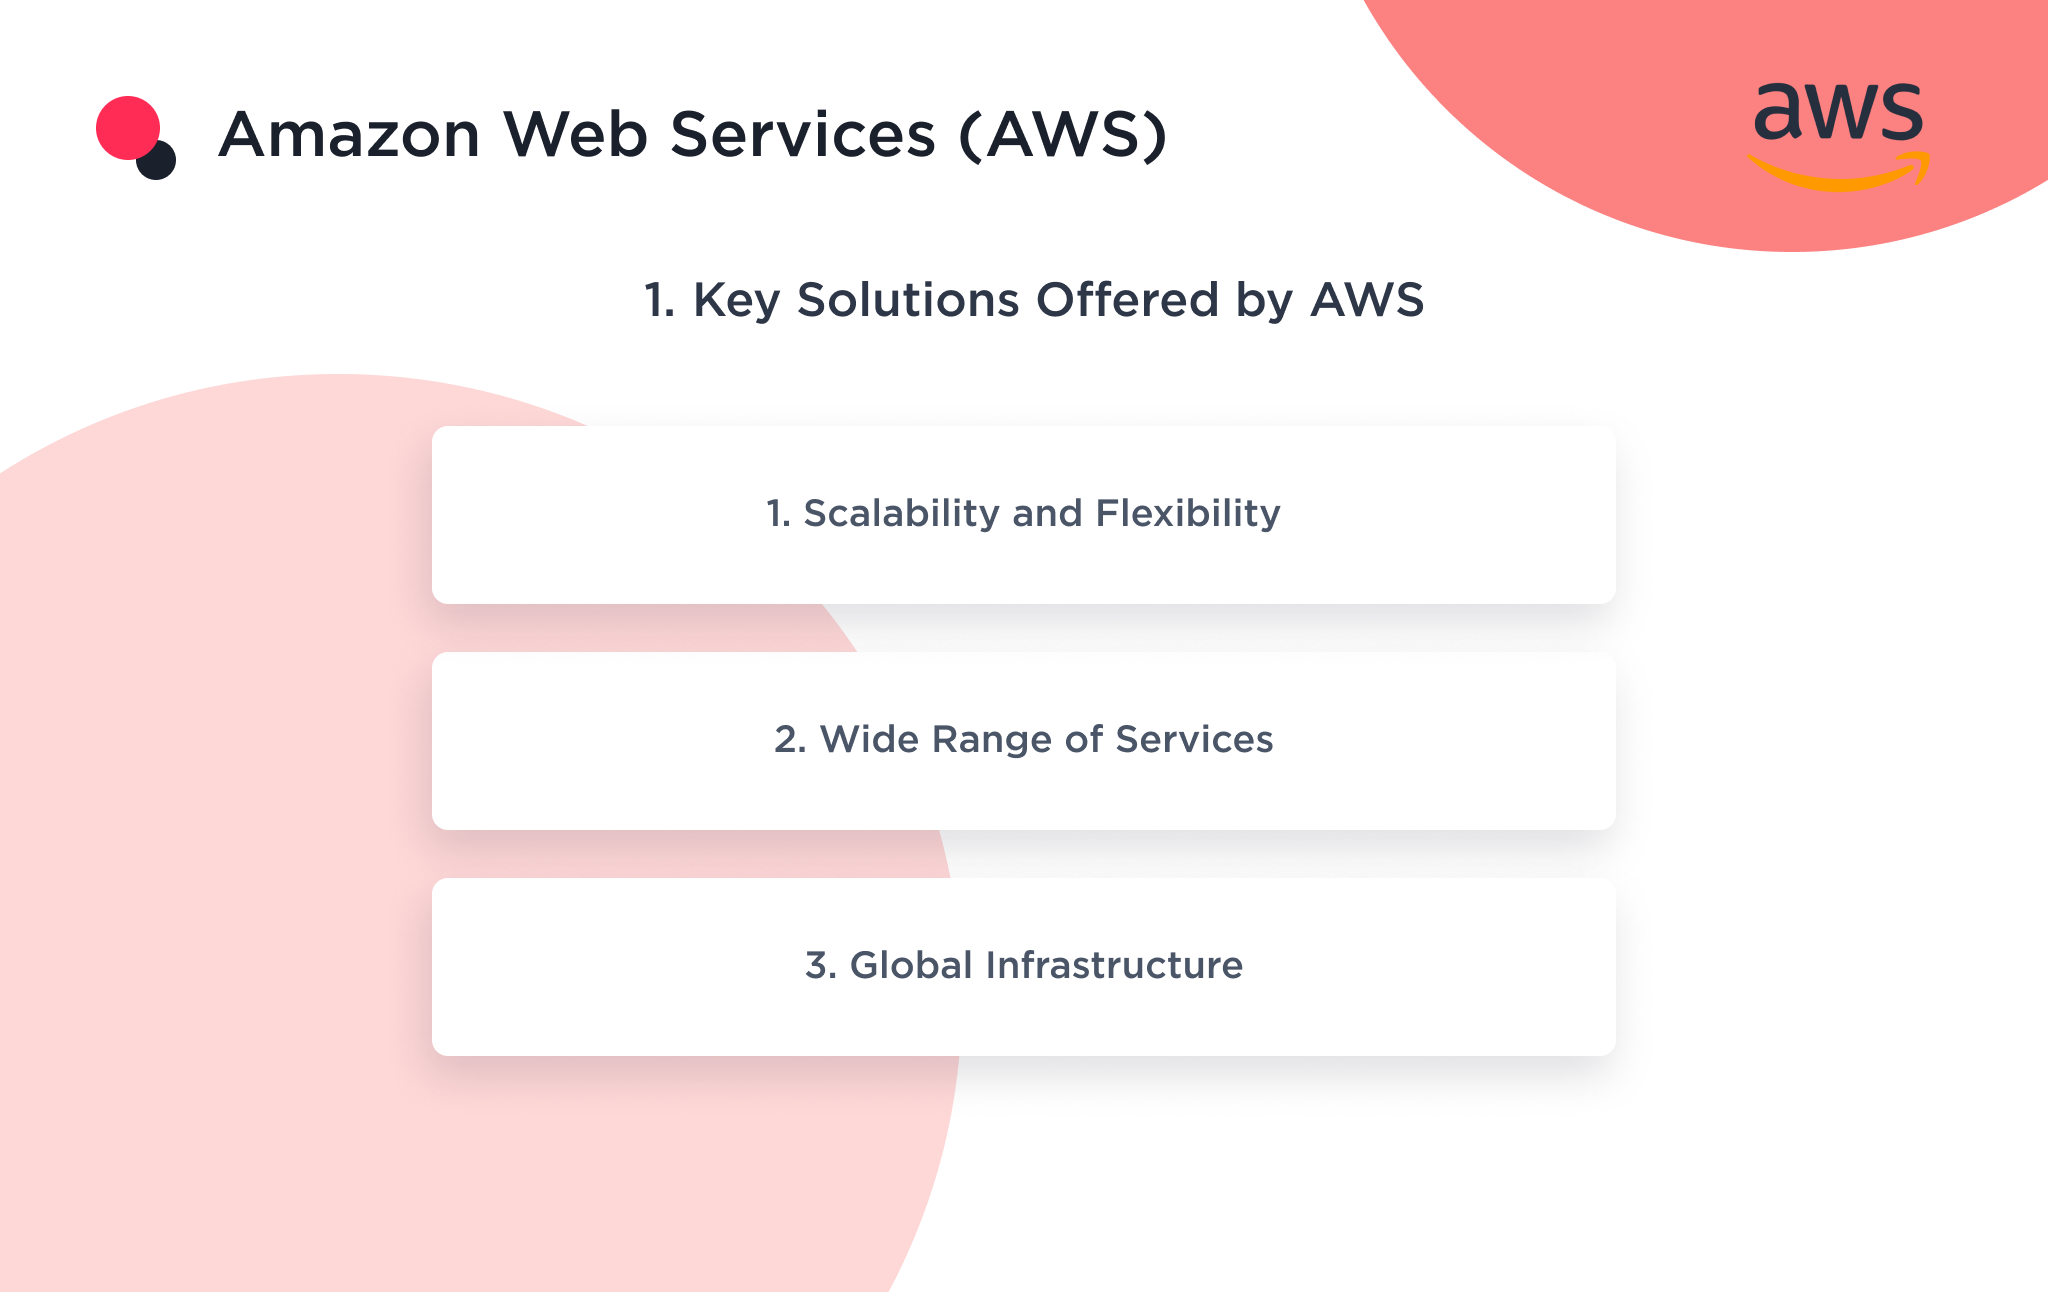 This image shows the key solutions offered by Amazon Web Services